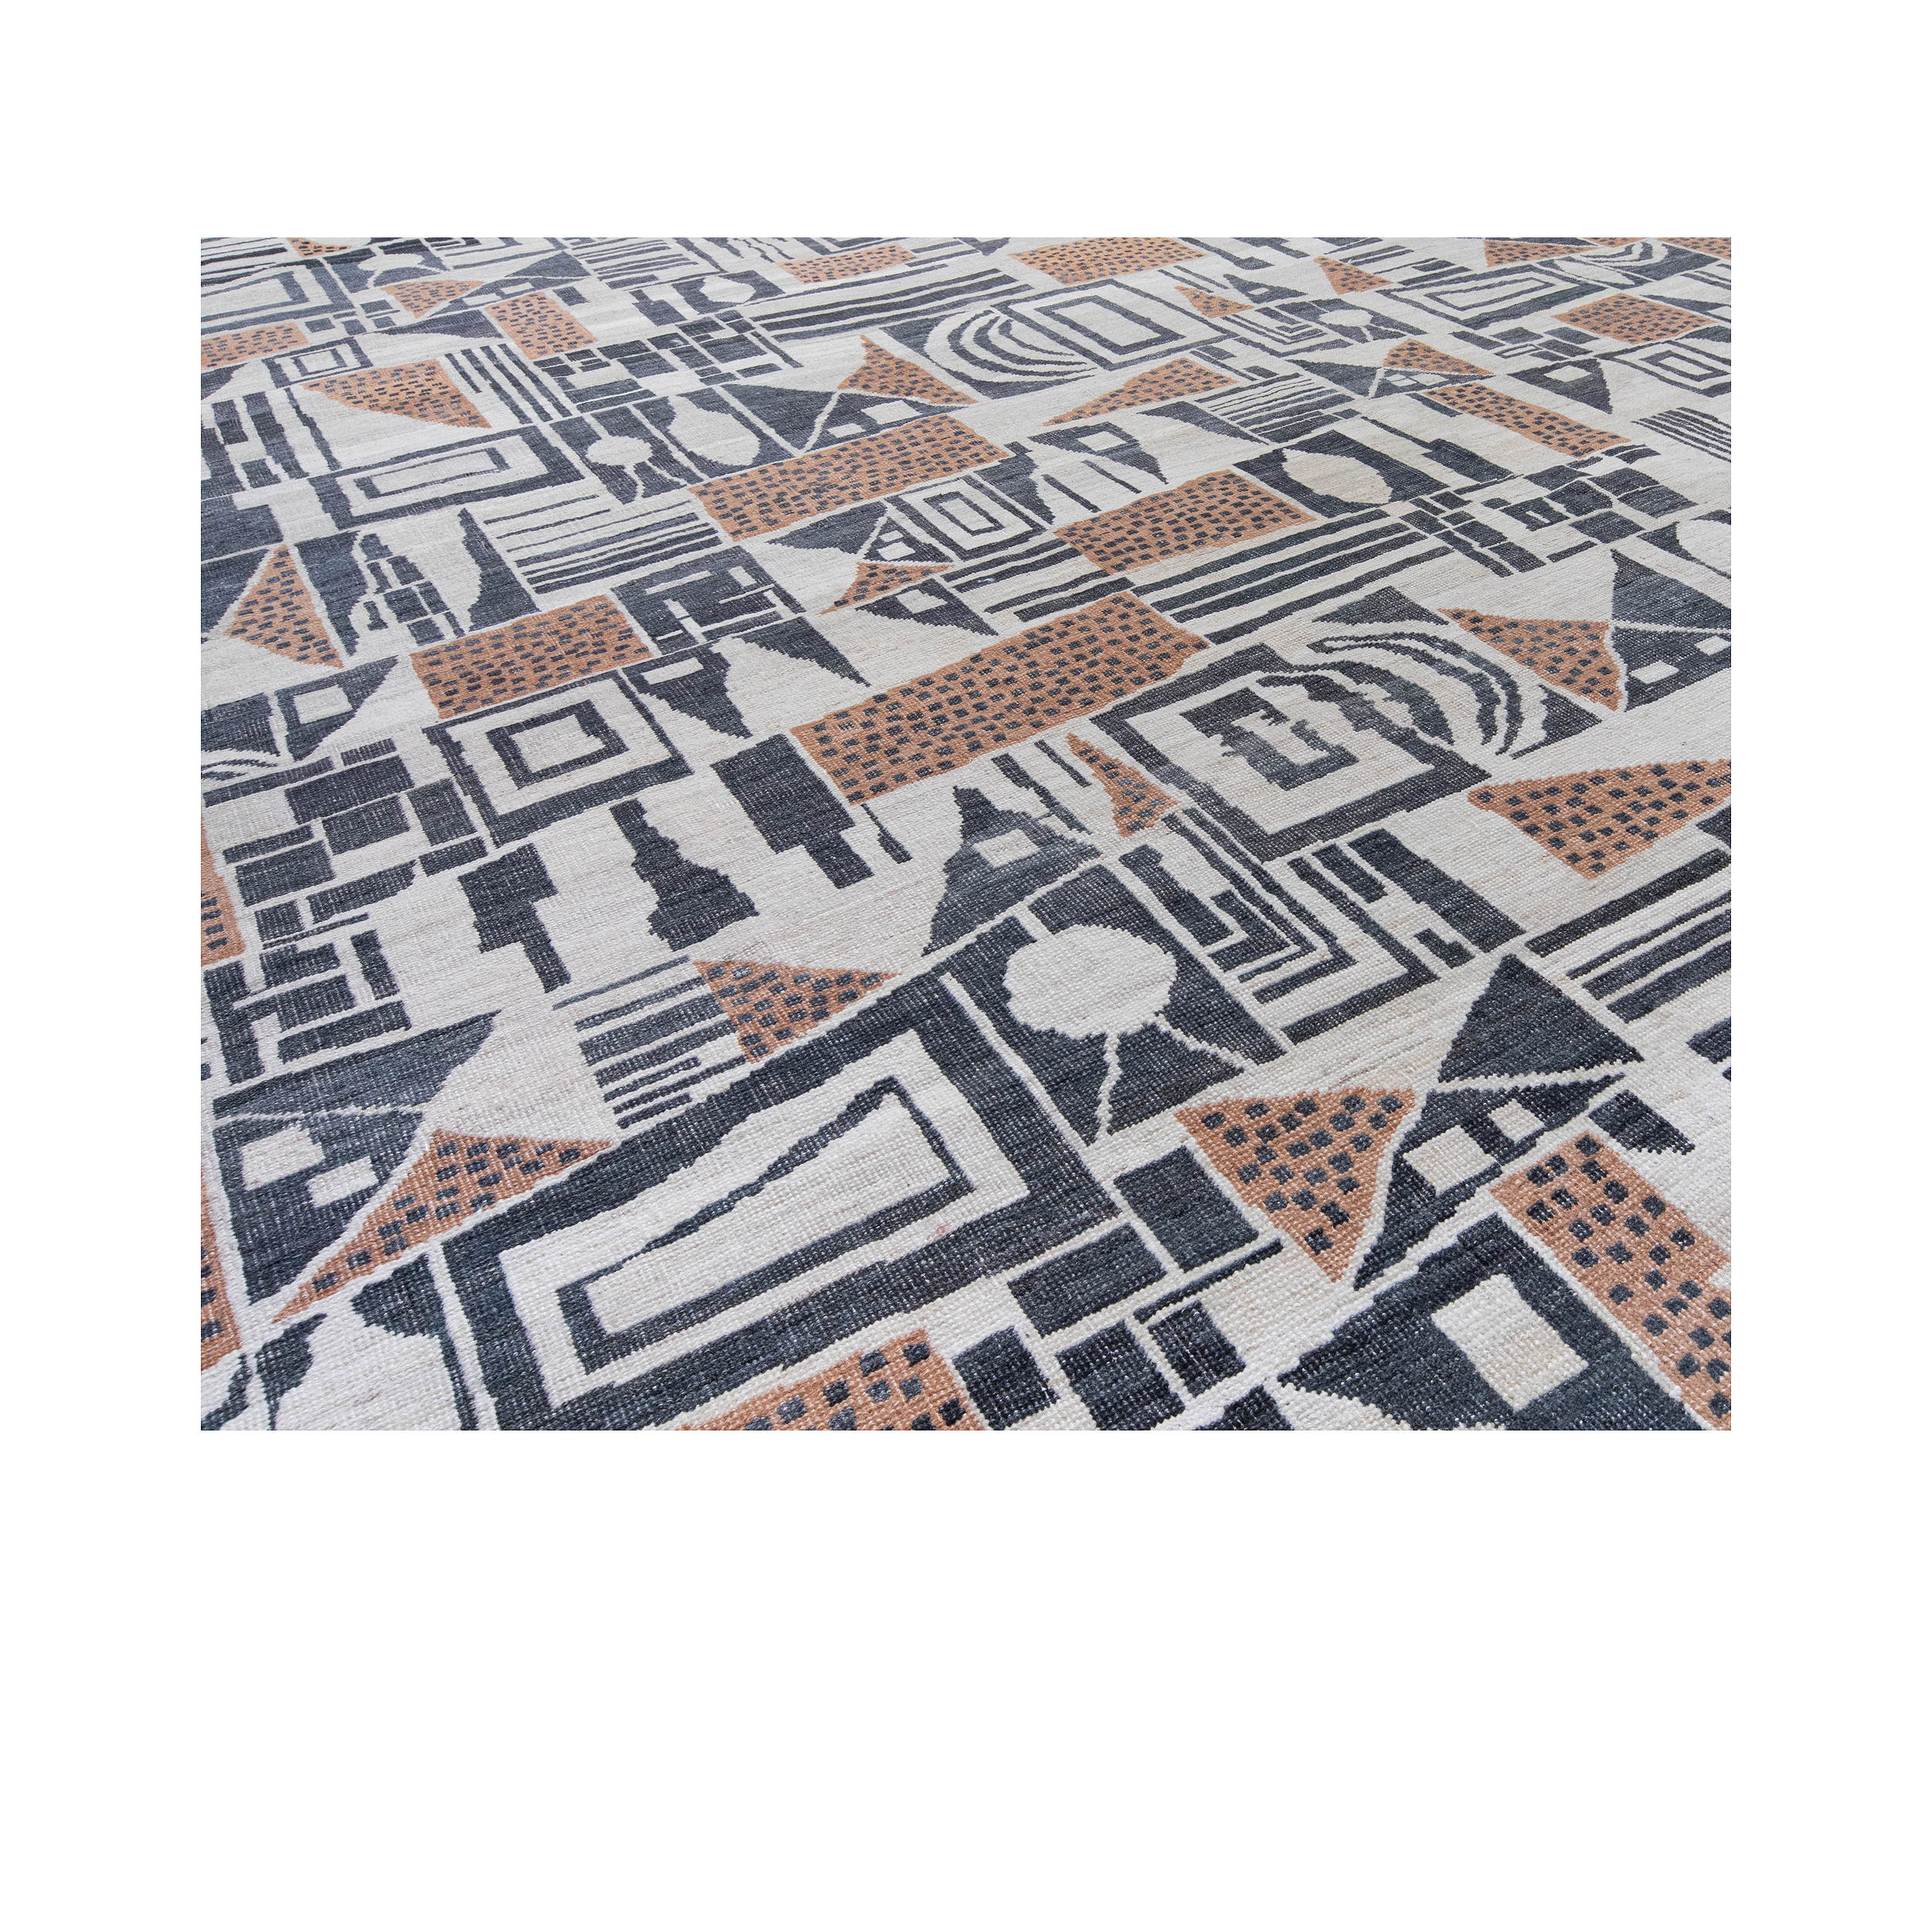 Cubist rug is hand-knotted using the finest quality wool and natural dyes.